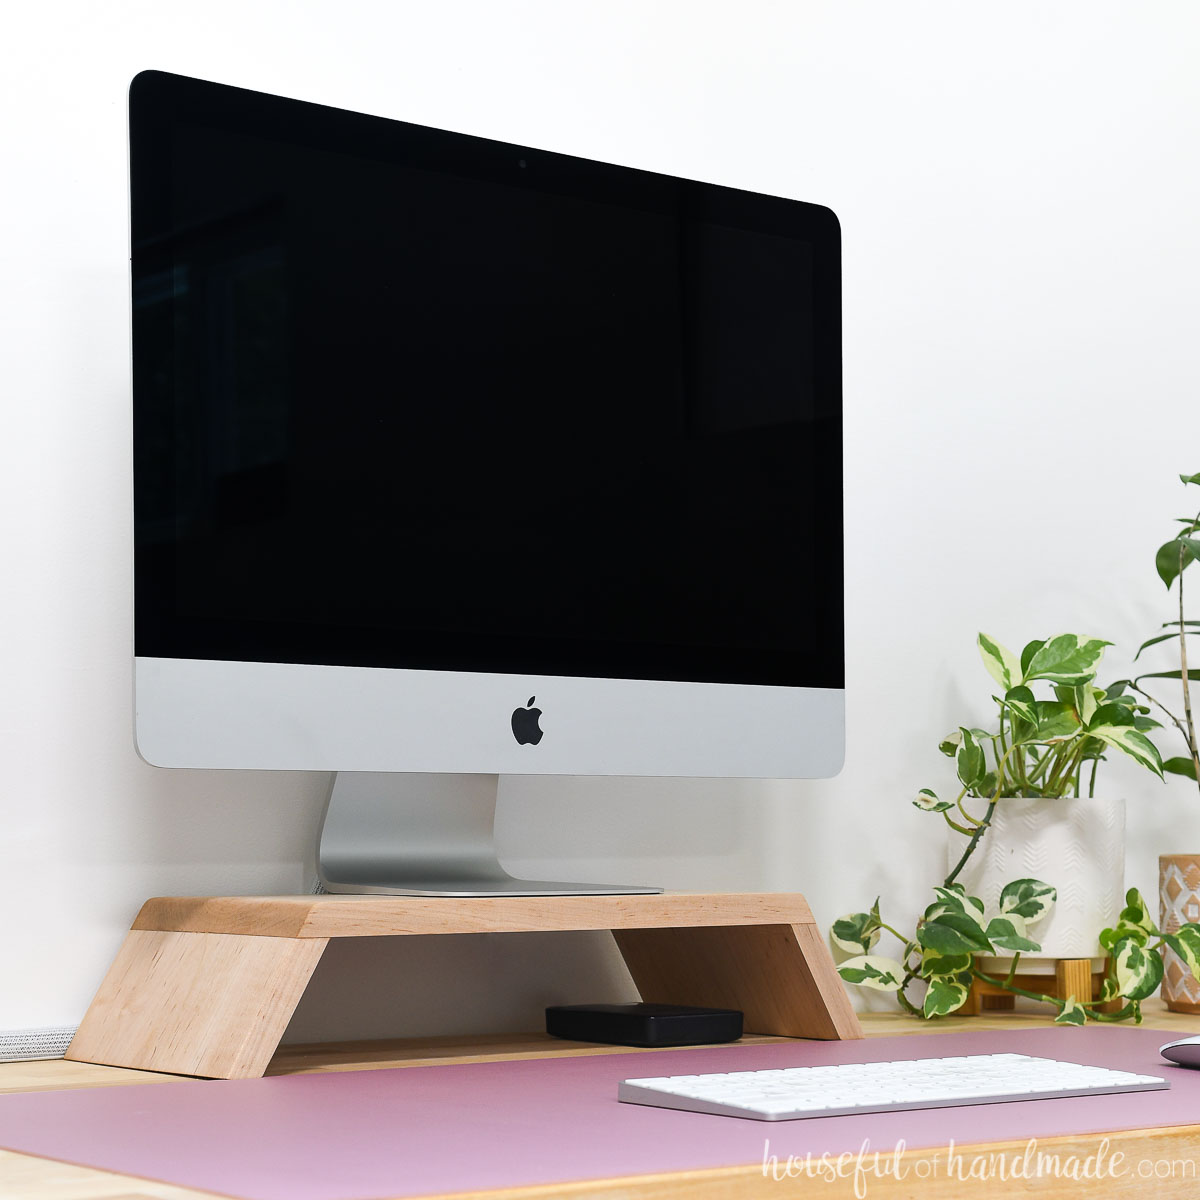 DIY monitor stand made from scrap wood with an iMac on top of it on a desk.